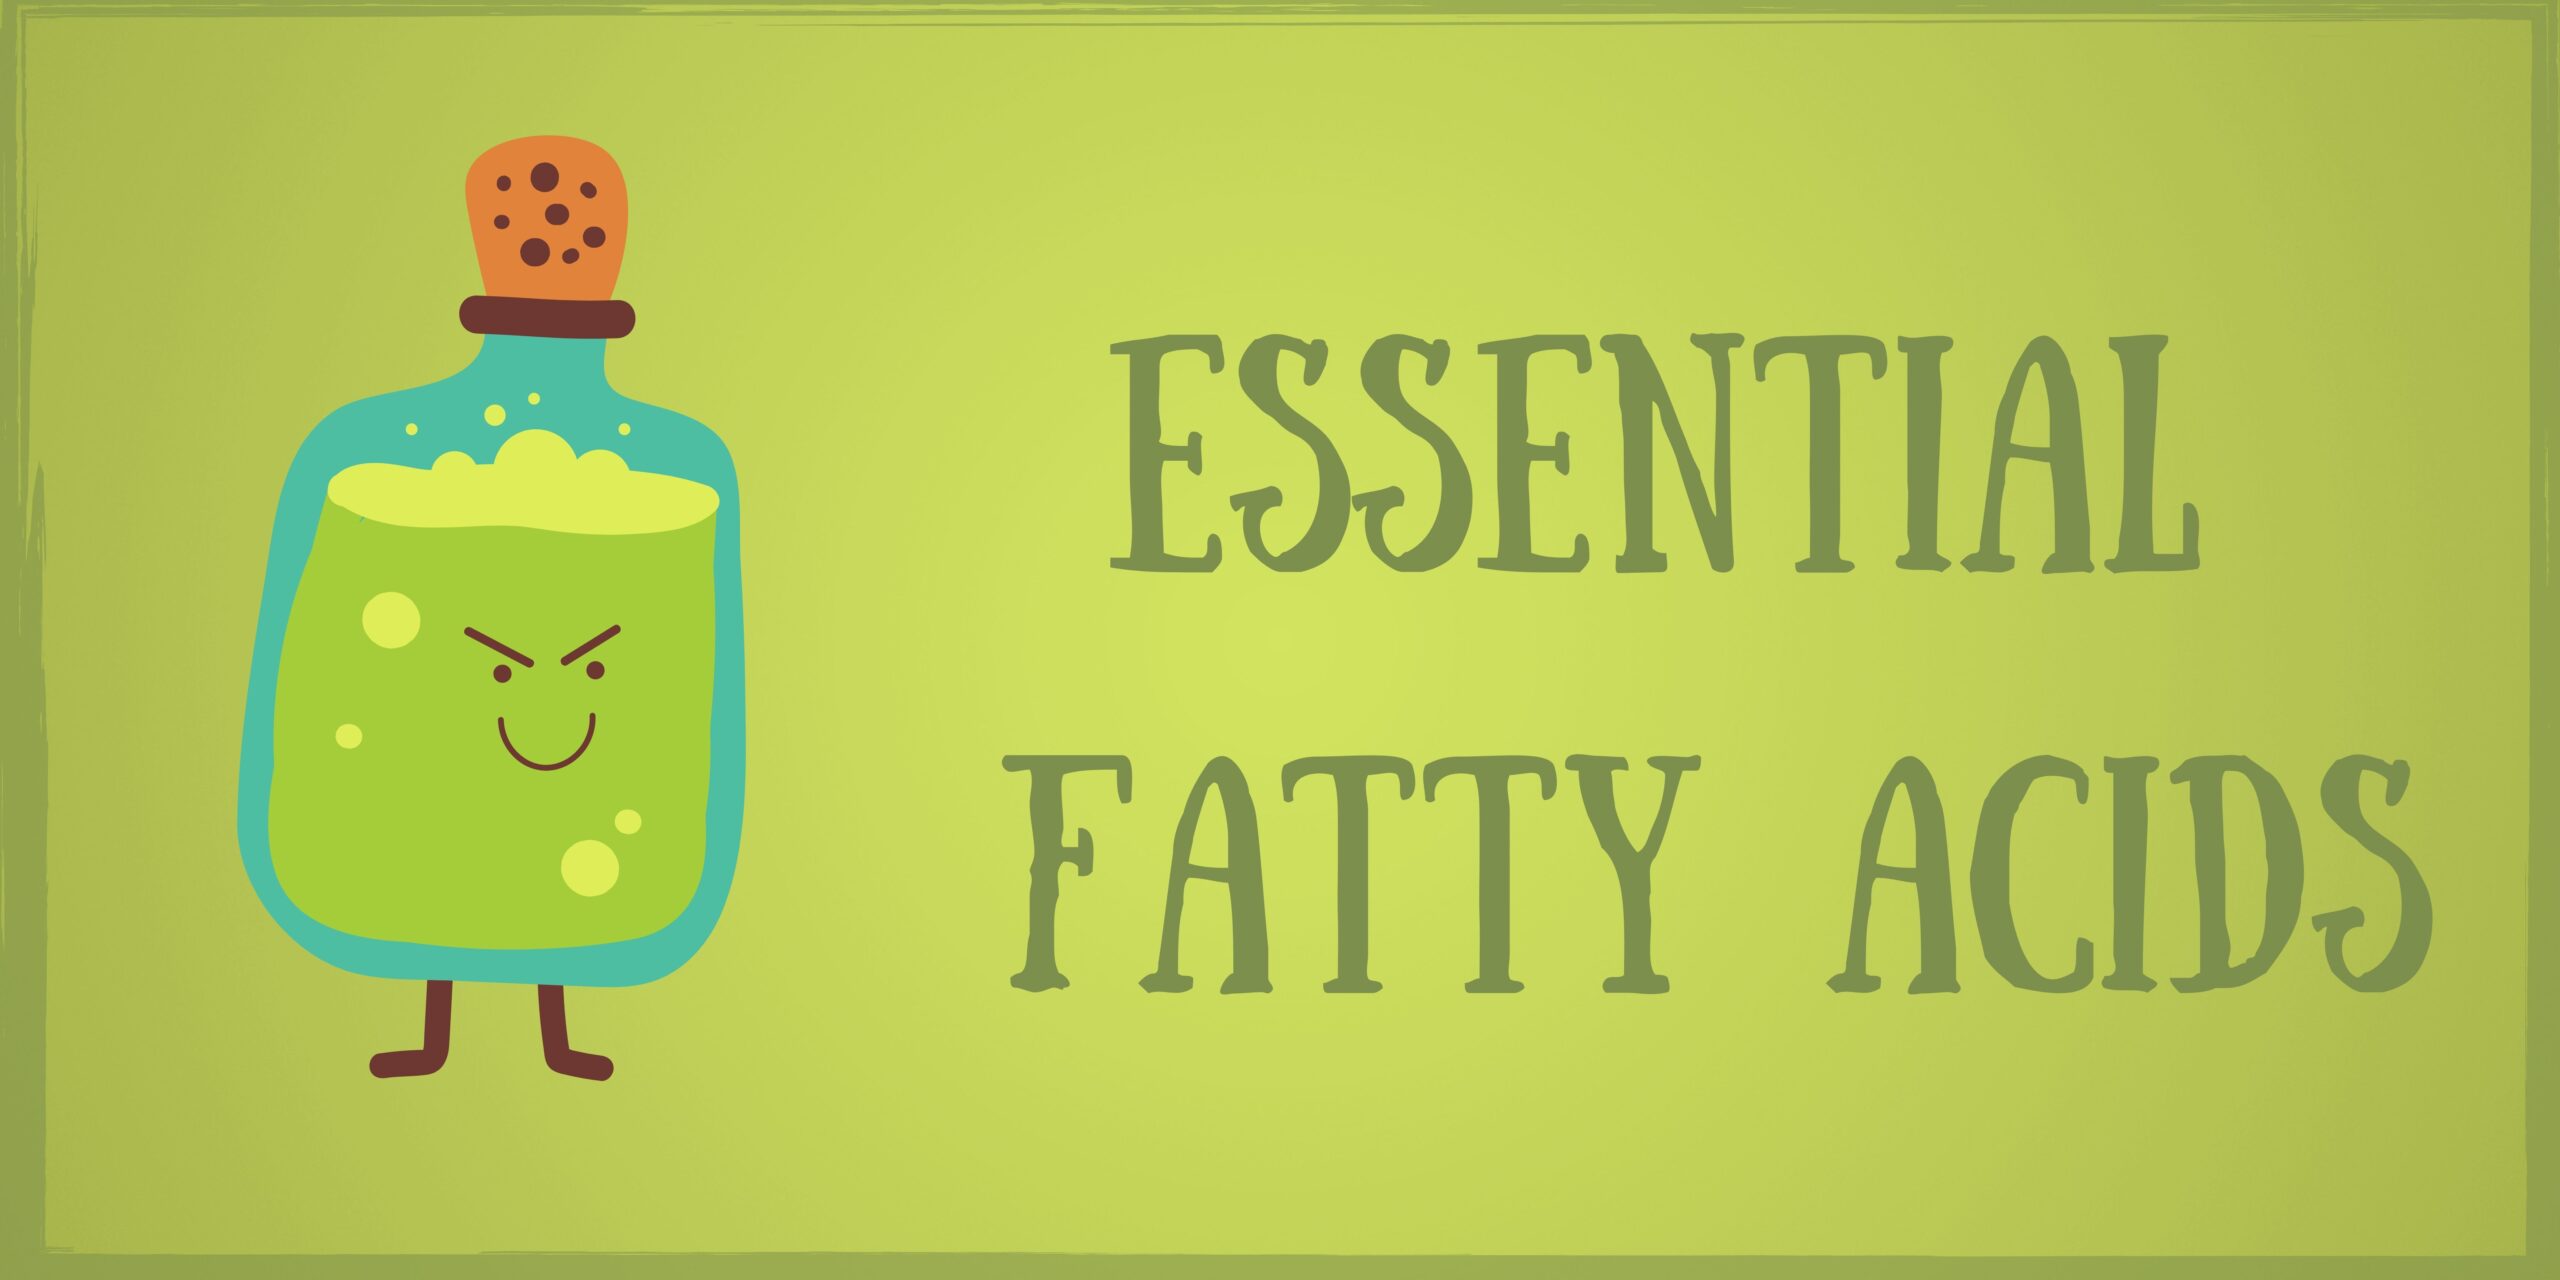 How things will change the way you approach Essential Fatty Acids!